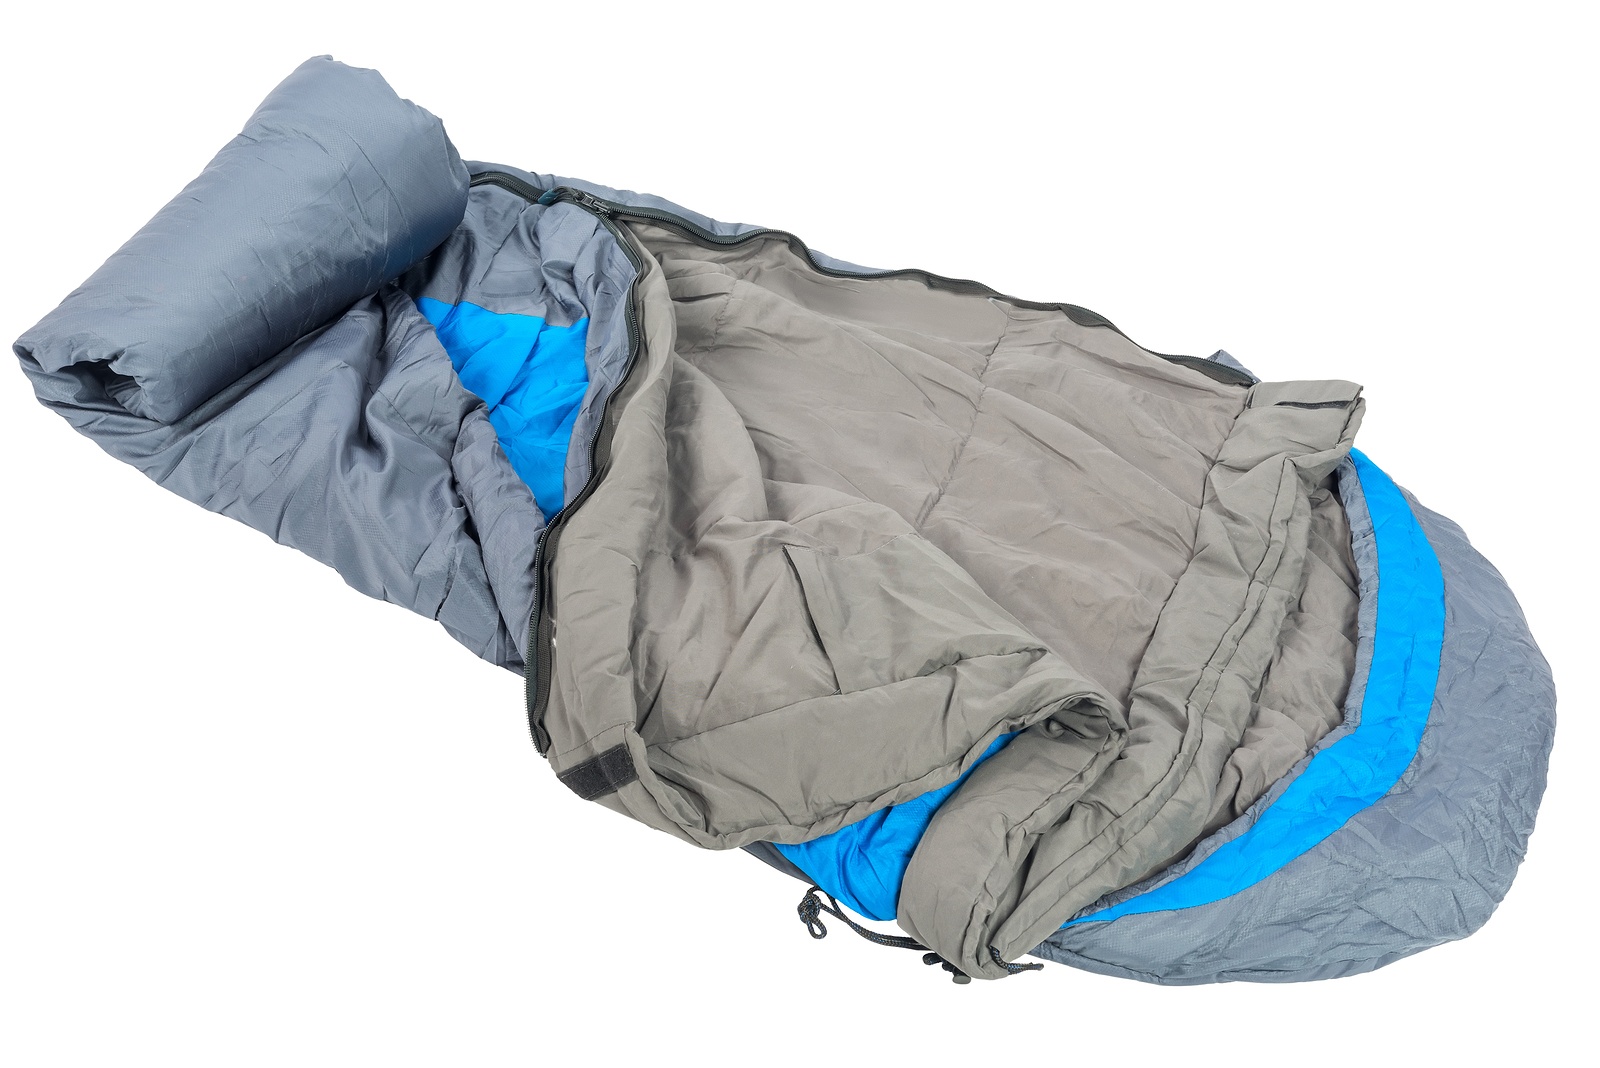 close-up of a sleeping bag is very warm for sleeping outdoors isolated